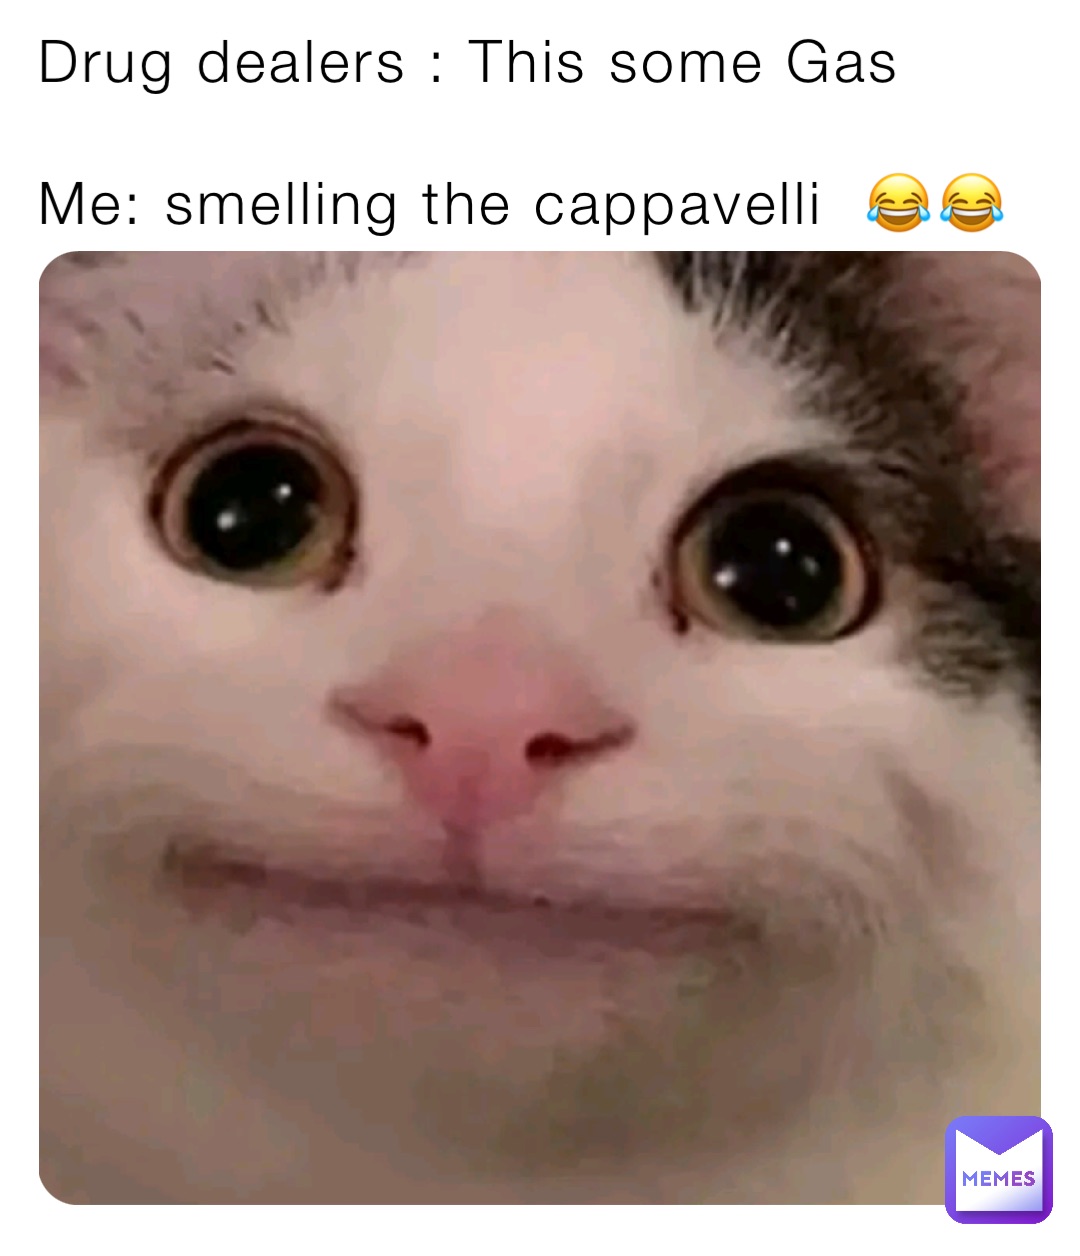 Drug dealers : This some Gas 

Me: smelling the cappavelli  😂😂